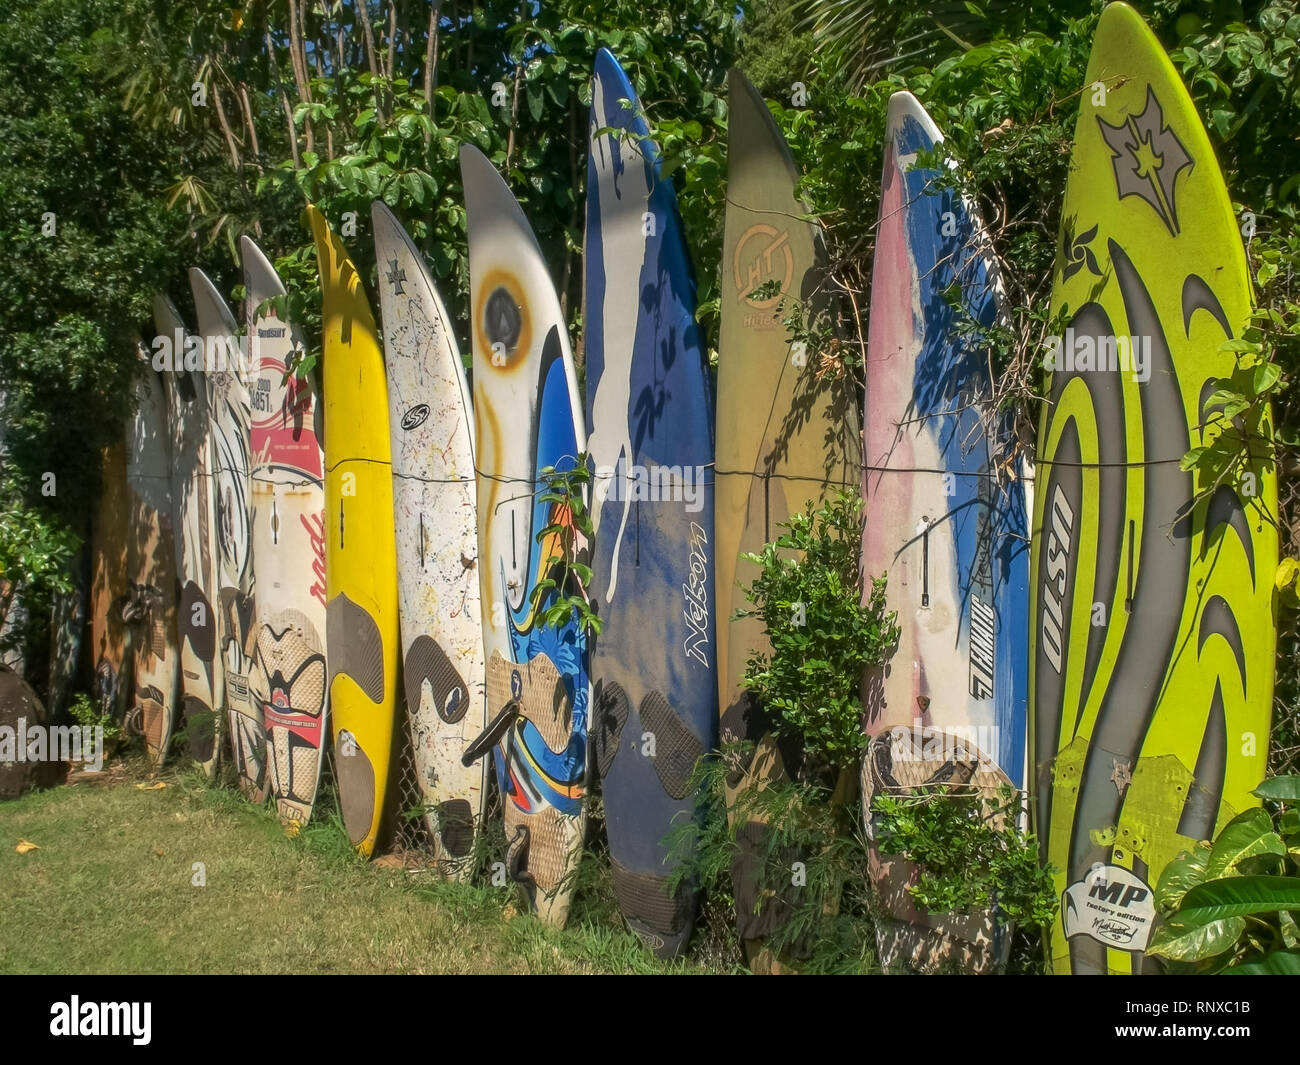 PAIA, UNITED STATES OF AMERICA - AUGUST 10 2015: a collection of old retired windsurfing boards at paia on maui Stock Photo